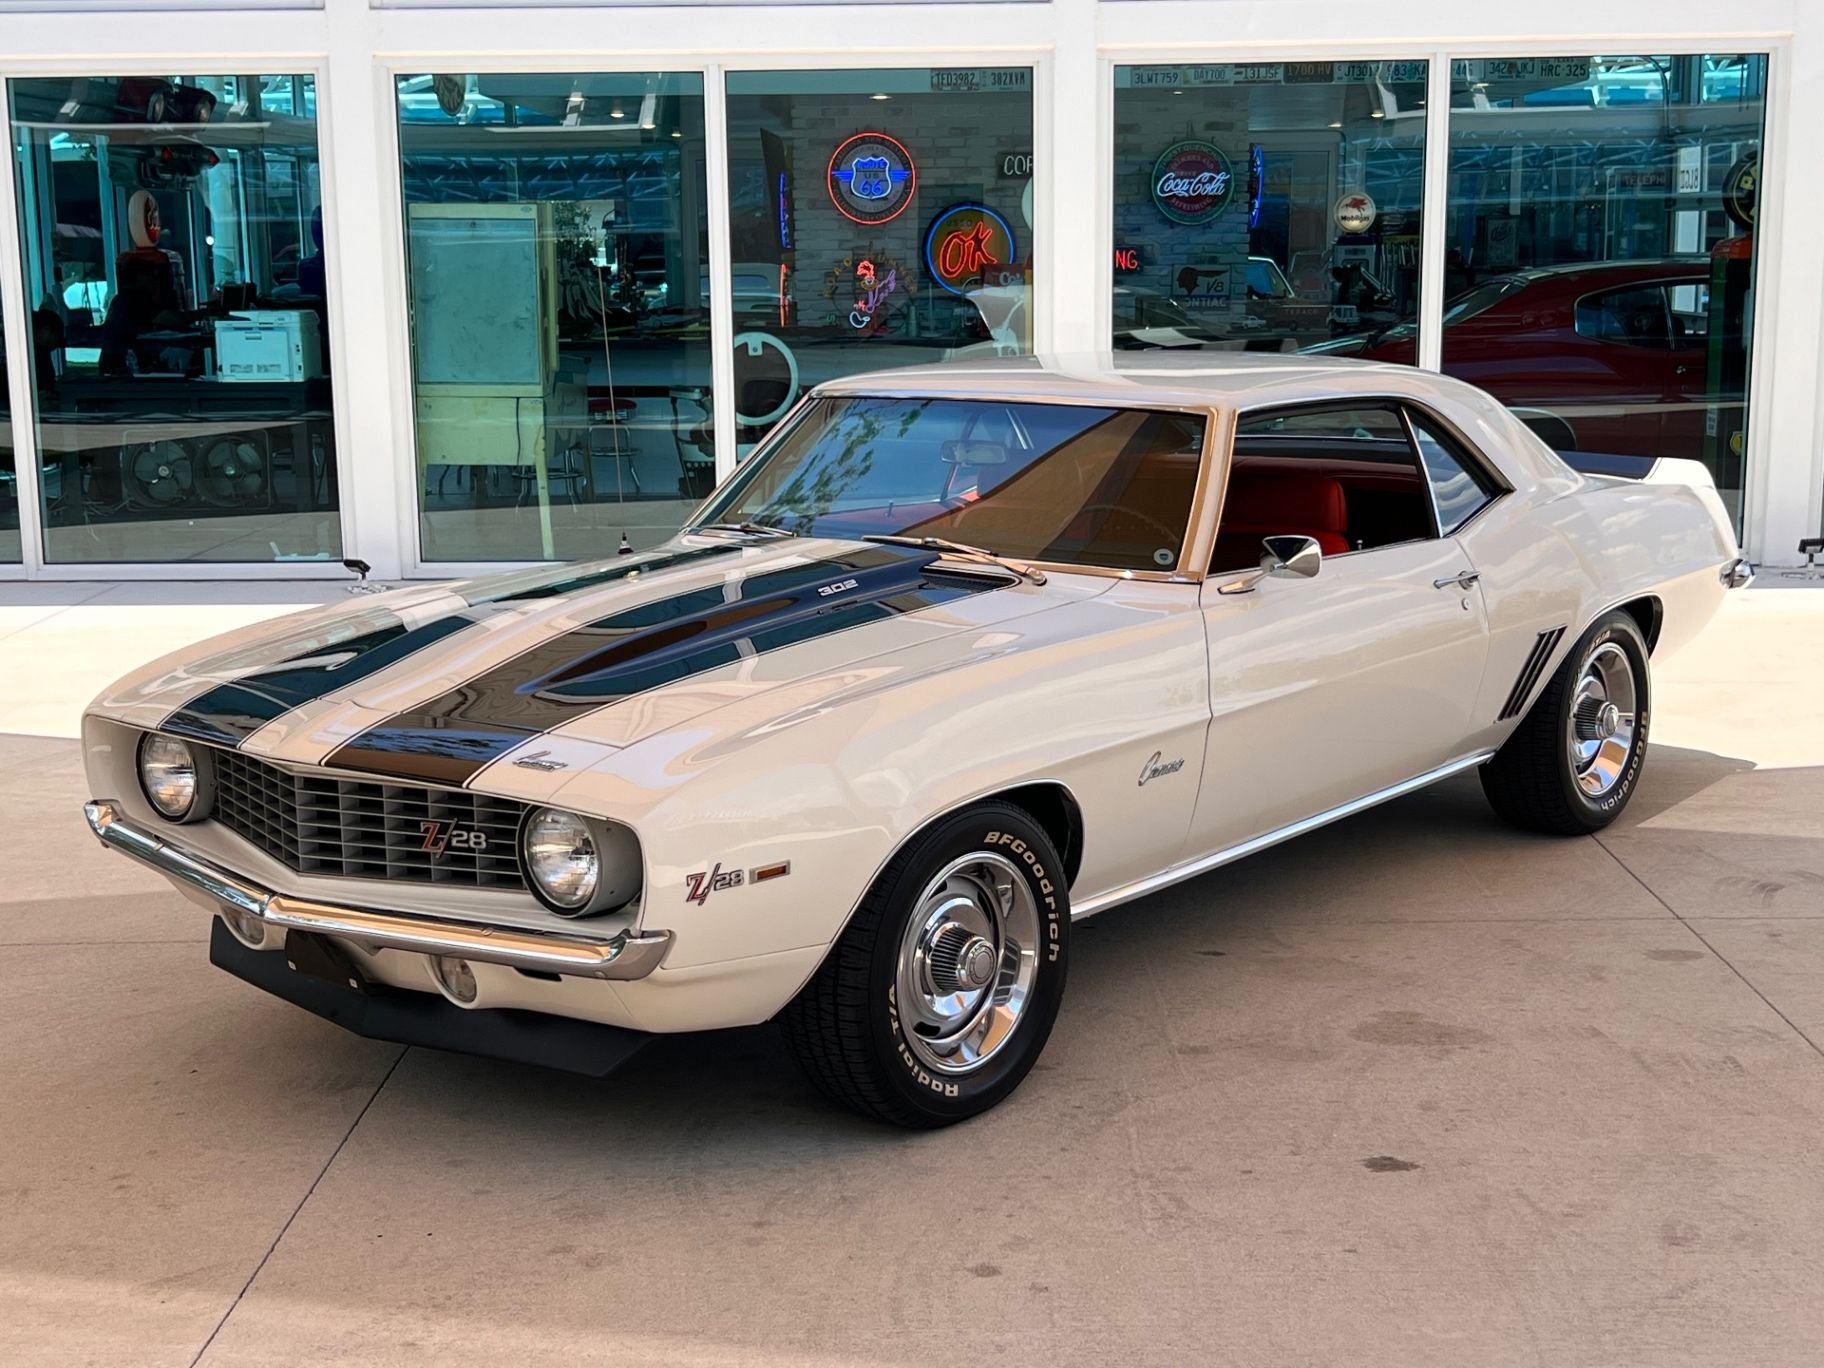 1969 Chevrolet Camaro Z28 Classic Cars And Used Cars For Sale In Tampa Fl